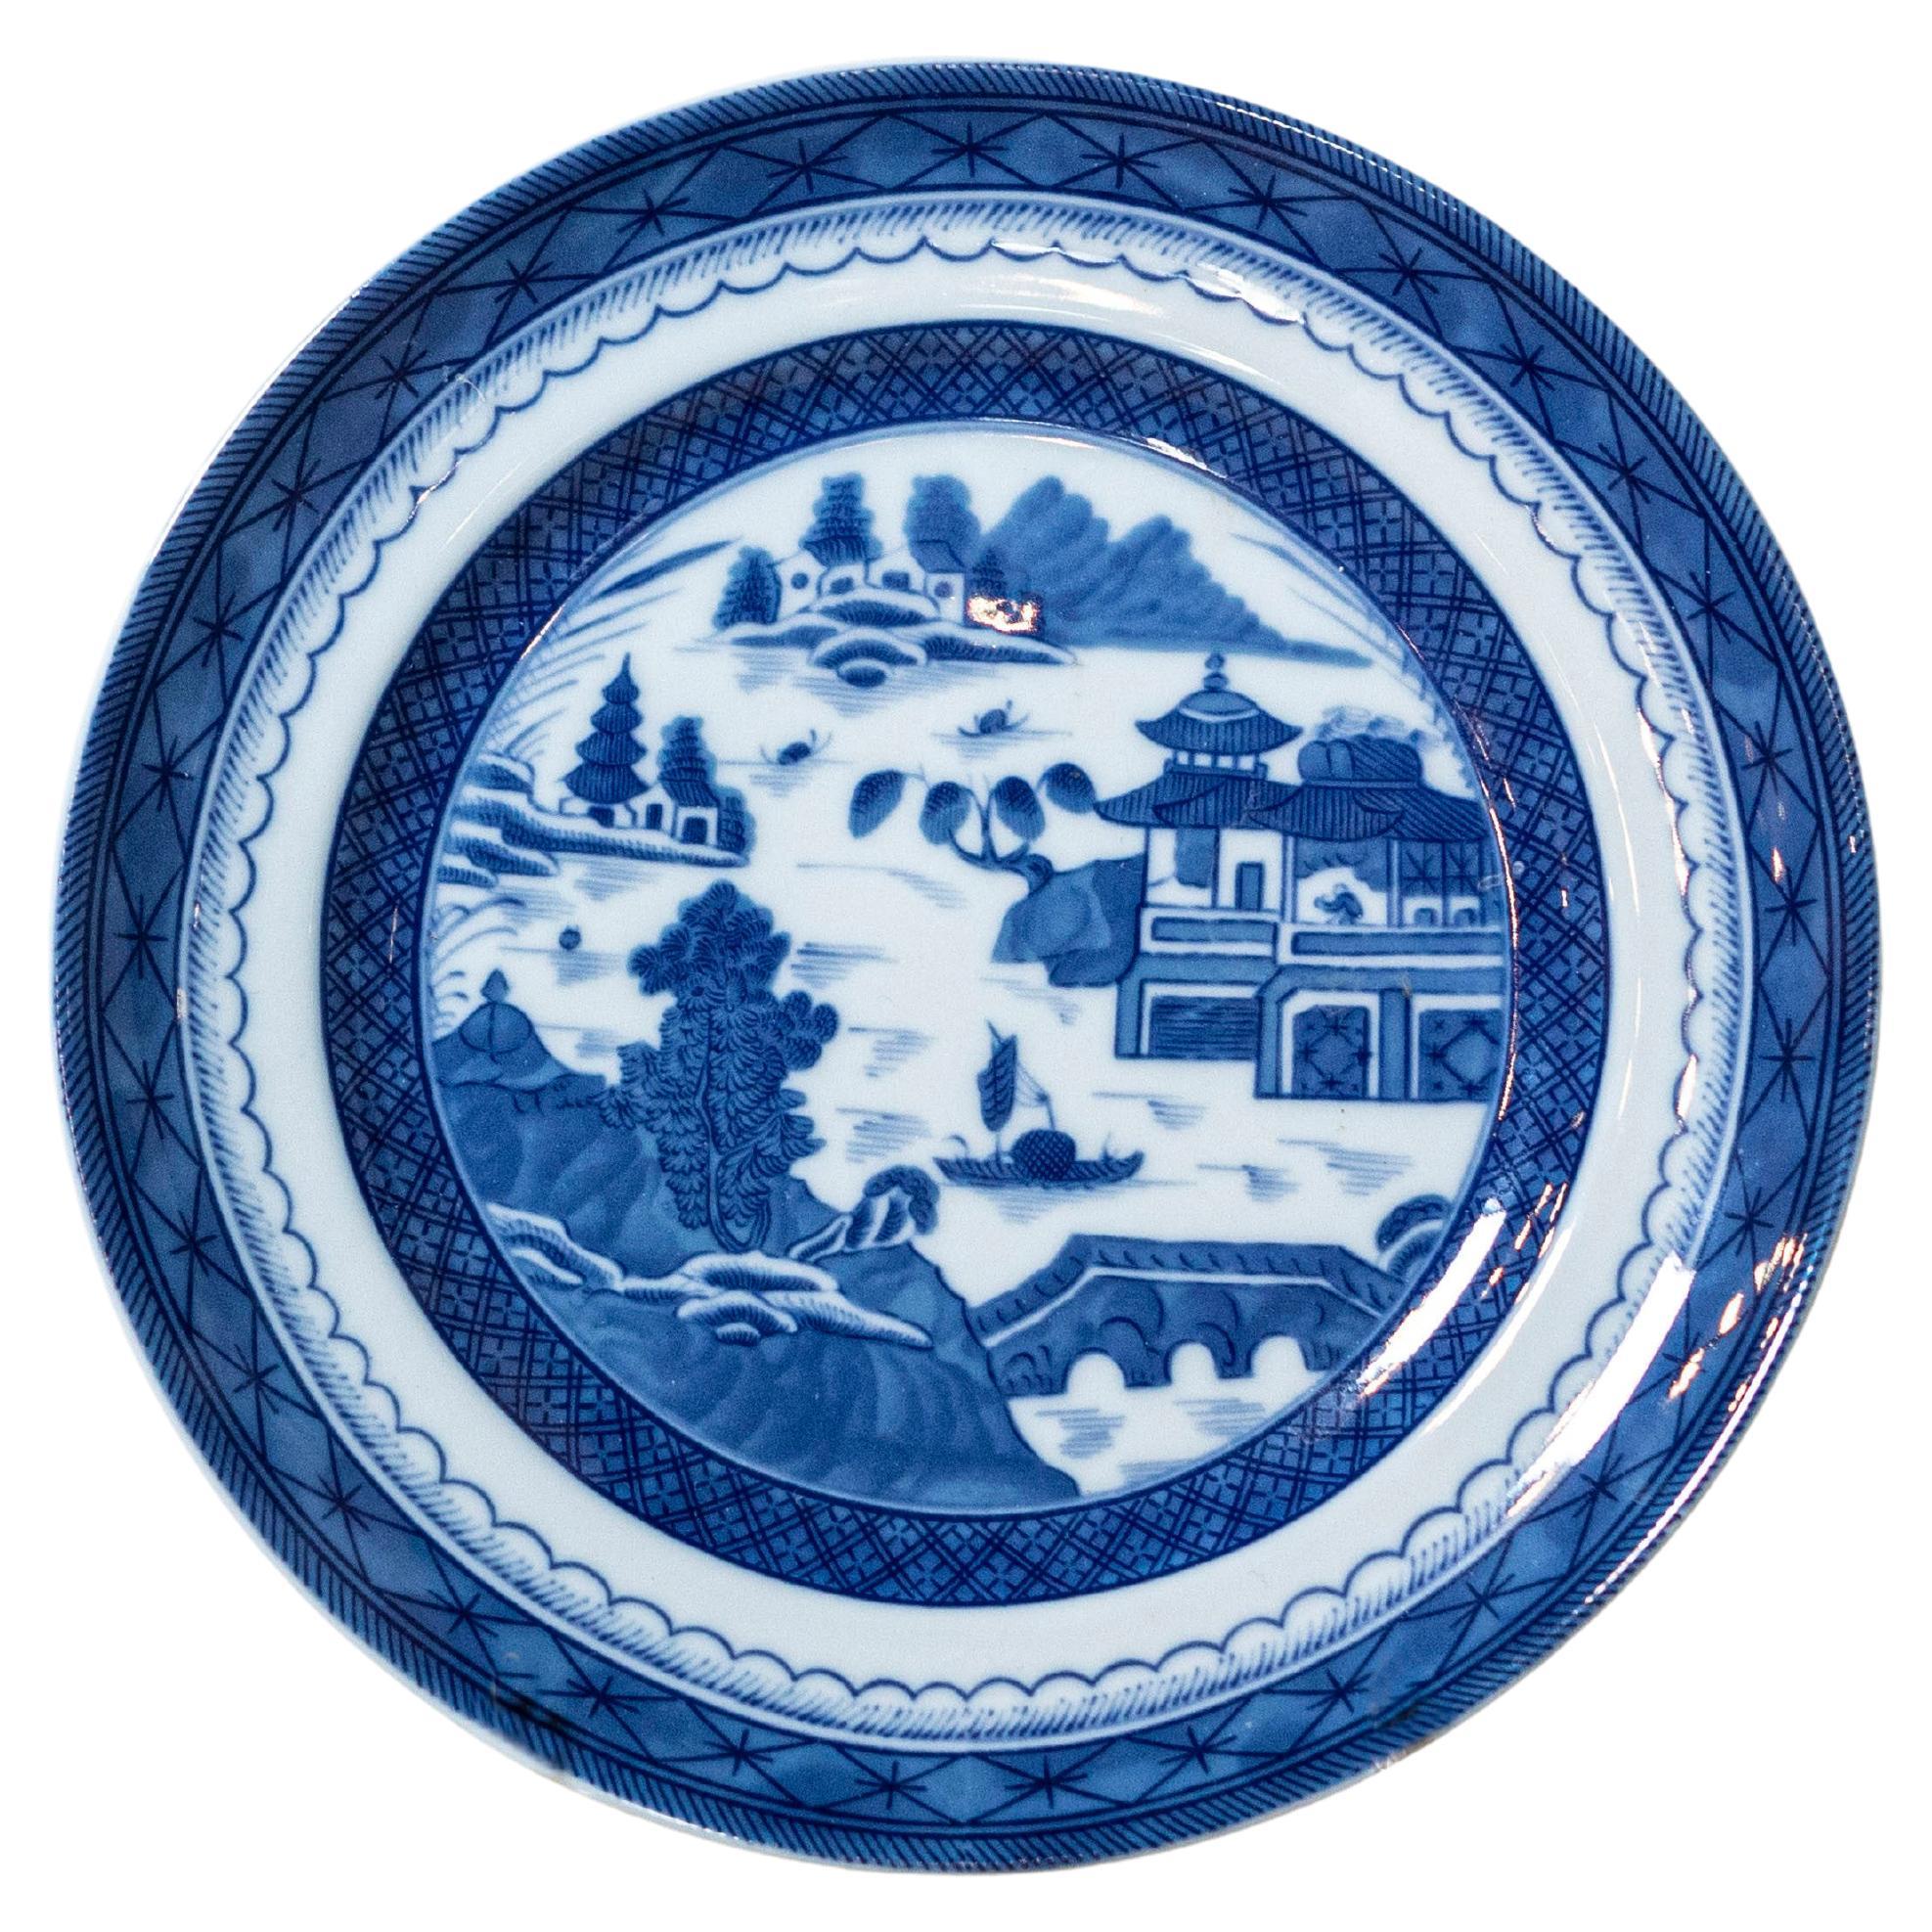 Mottahedeh Blue Canton Porcelain Plate with Blue and White Chinese Landscape